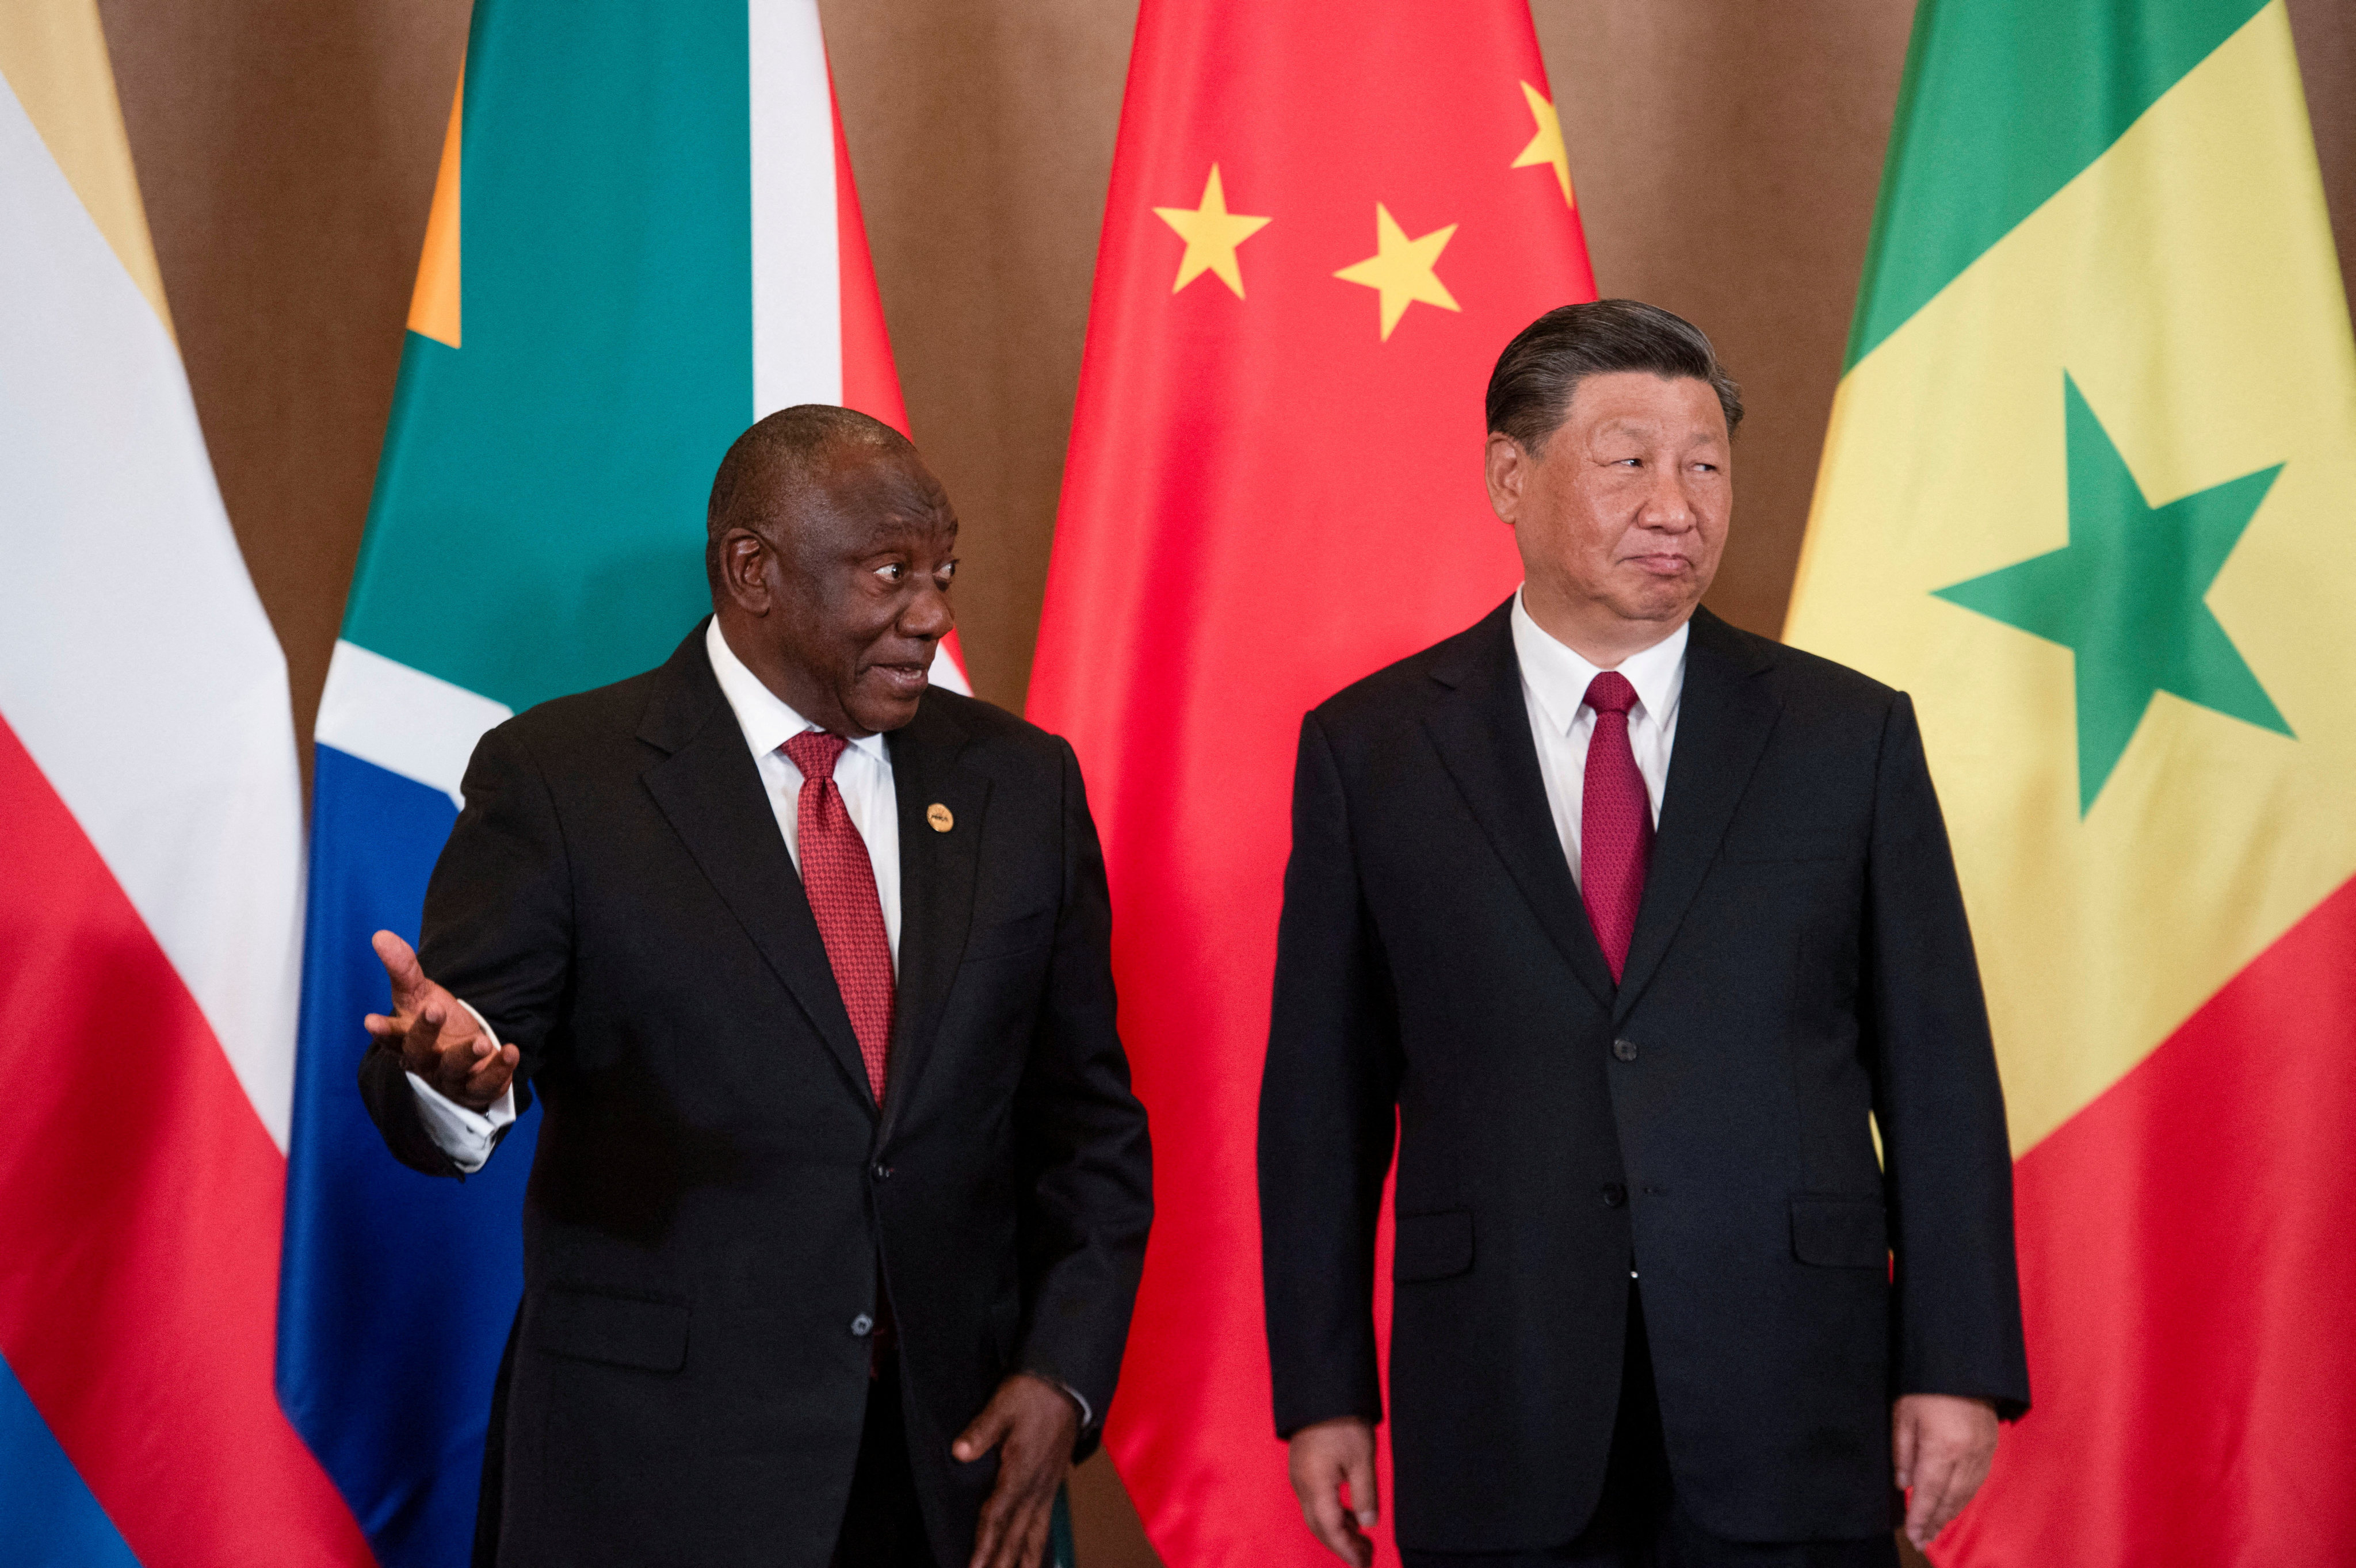 South African President Cyril Ramaphosa (left) and Chinese President Xi Jinping at the China-Africa Leaders’ Roundtable Dialogue on Thursday at the Brics summit in Johannesburg. Photo: Reuters